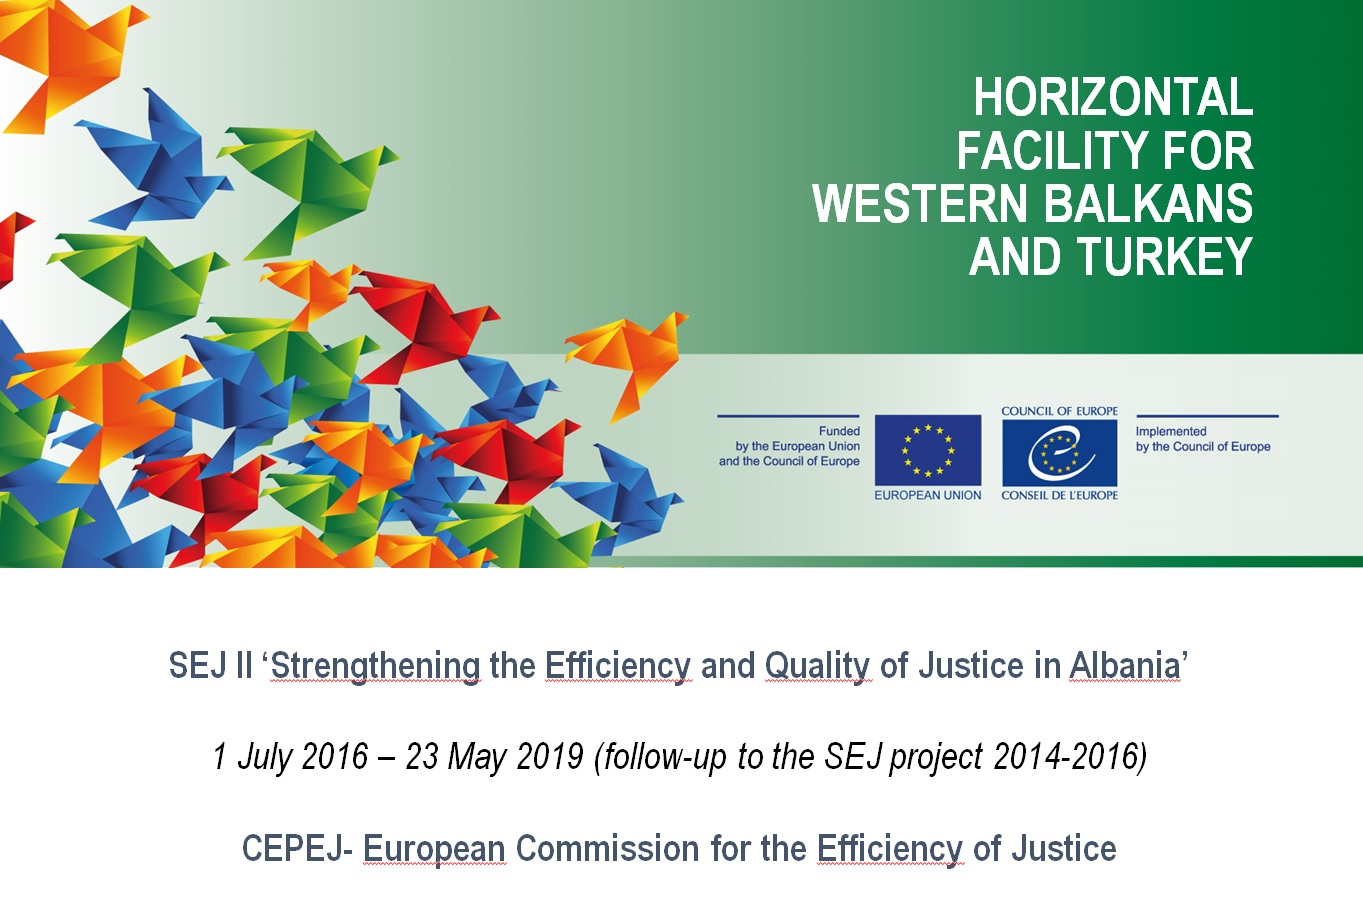 Third Meeting of the Horizontal Facility Steering Committee for Albania